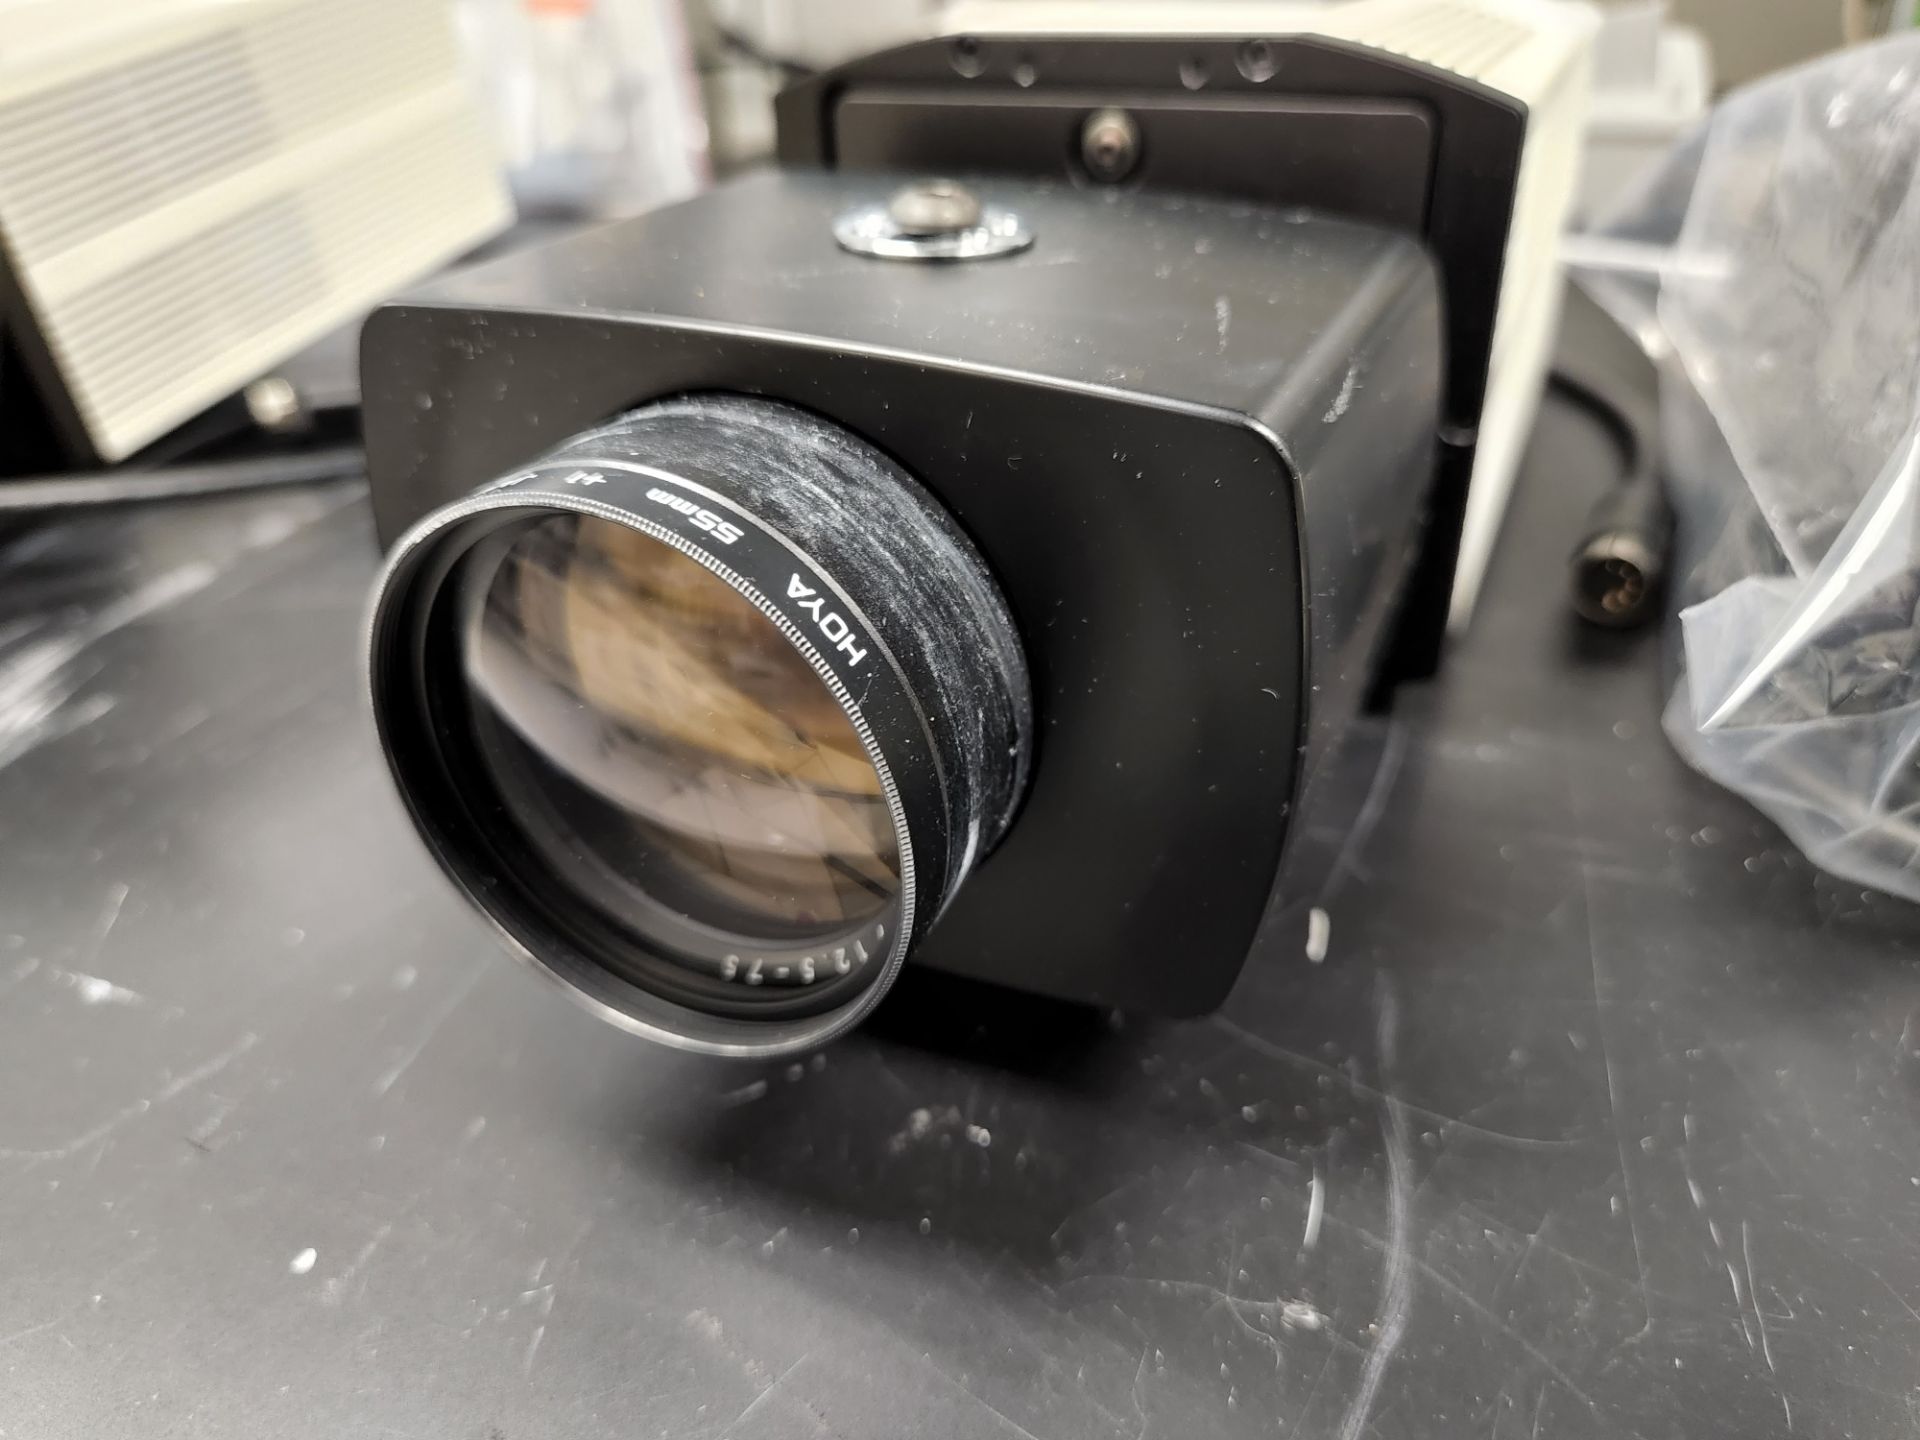 Bio-Rad Model 1708255 Camera With Lense Adapter And Power Supply (Asset I.D. # ) - Image 2 of 4